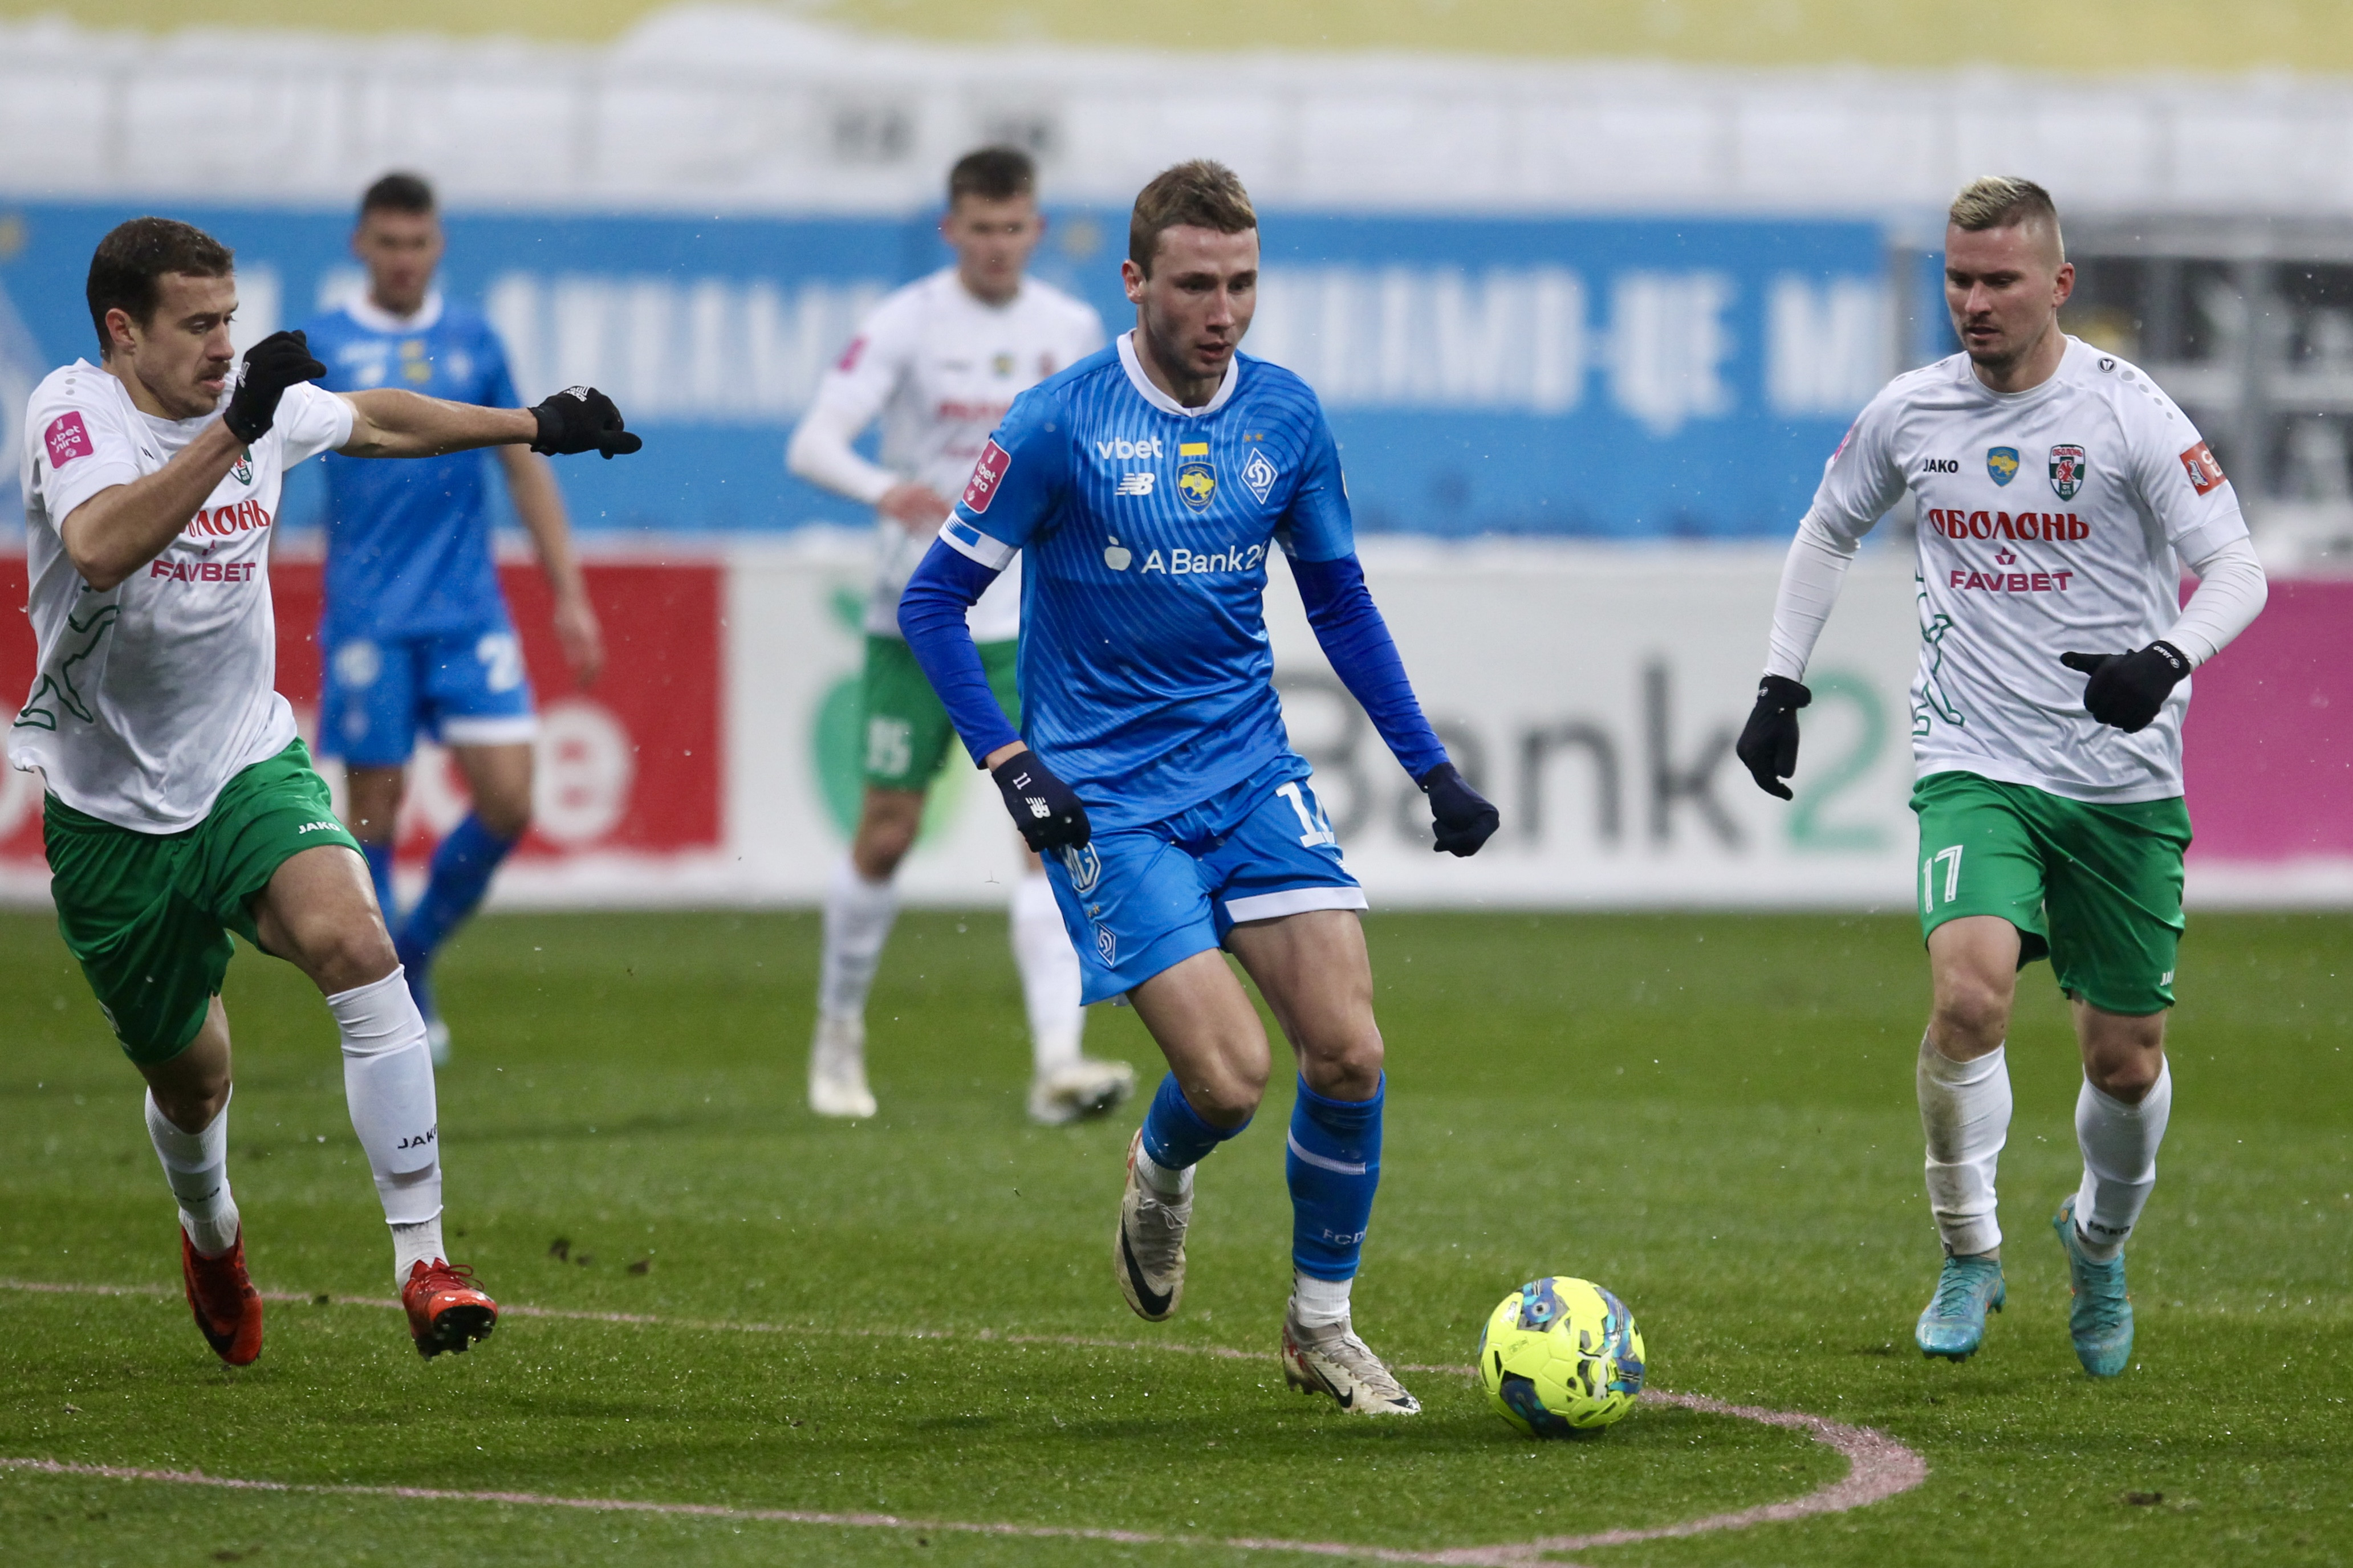 Vladyslav Vanat: “We wanted to finish the year positively”